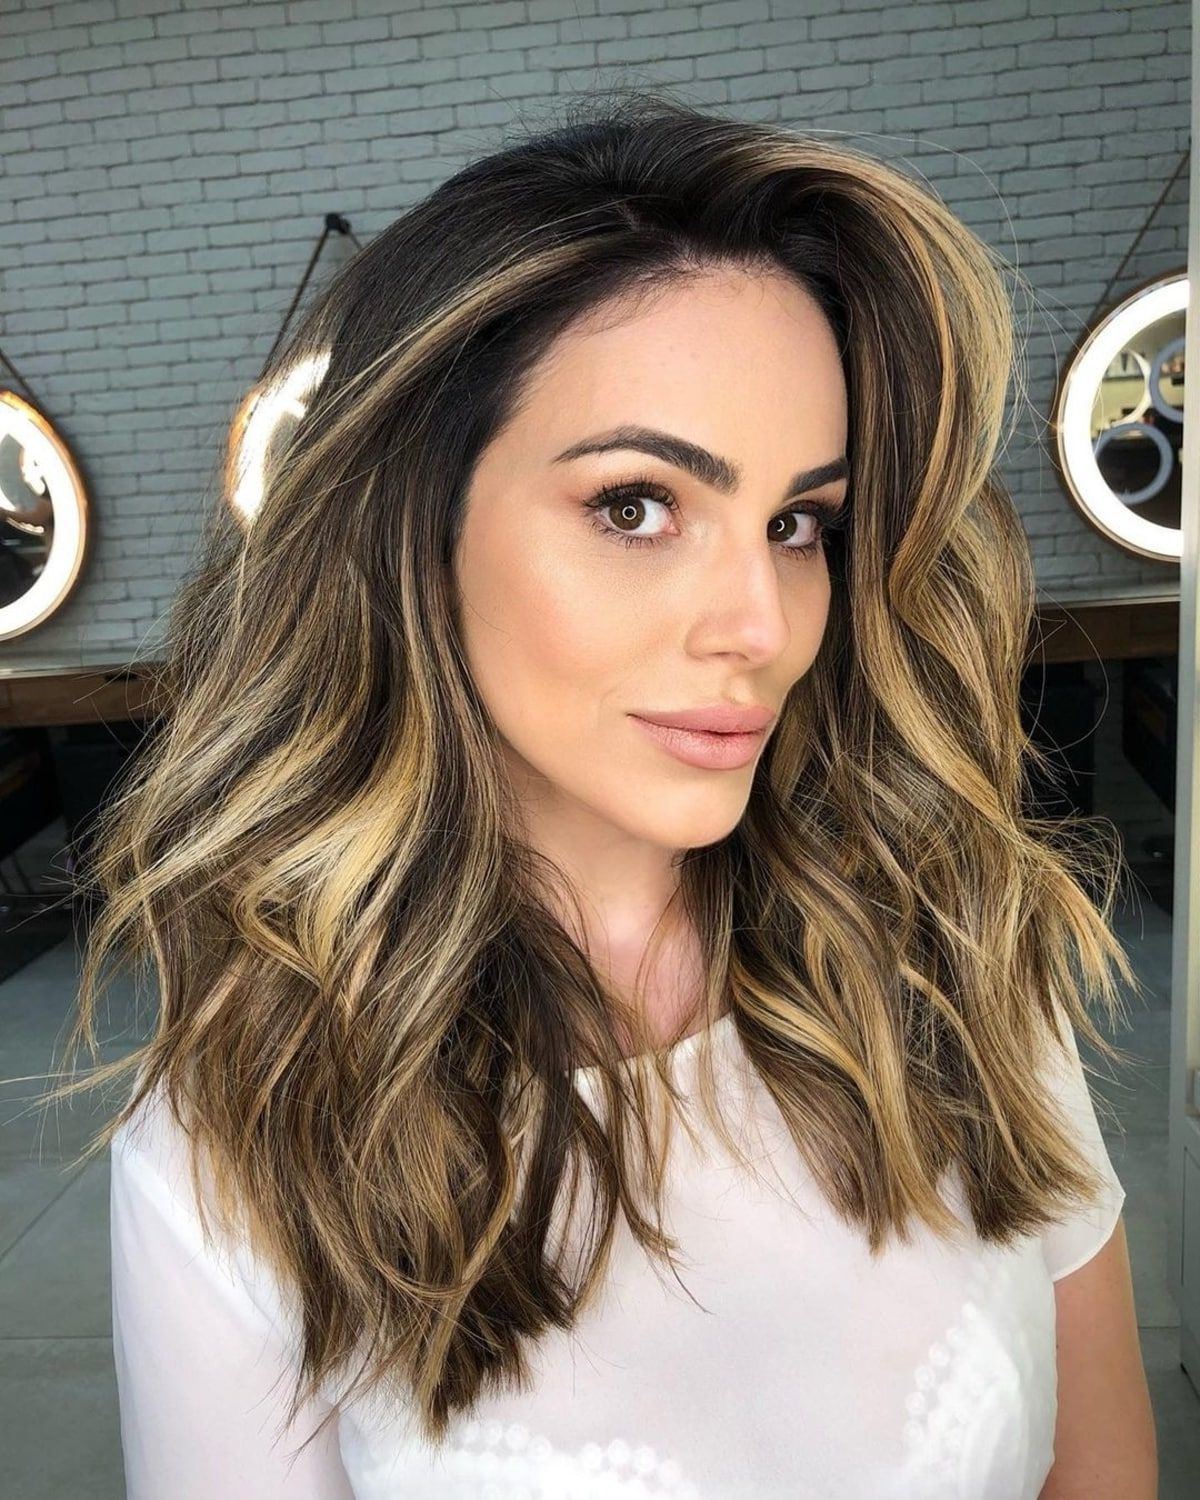 53 Best Medium Length Hairstyles For Thick Hair To Feel Lighter Throughout Most Recently Easy Medium Length Hairstyles For Thick Wavy Hair (View 11 of 25)